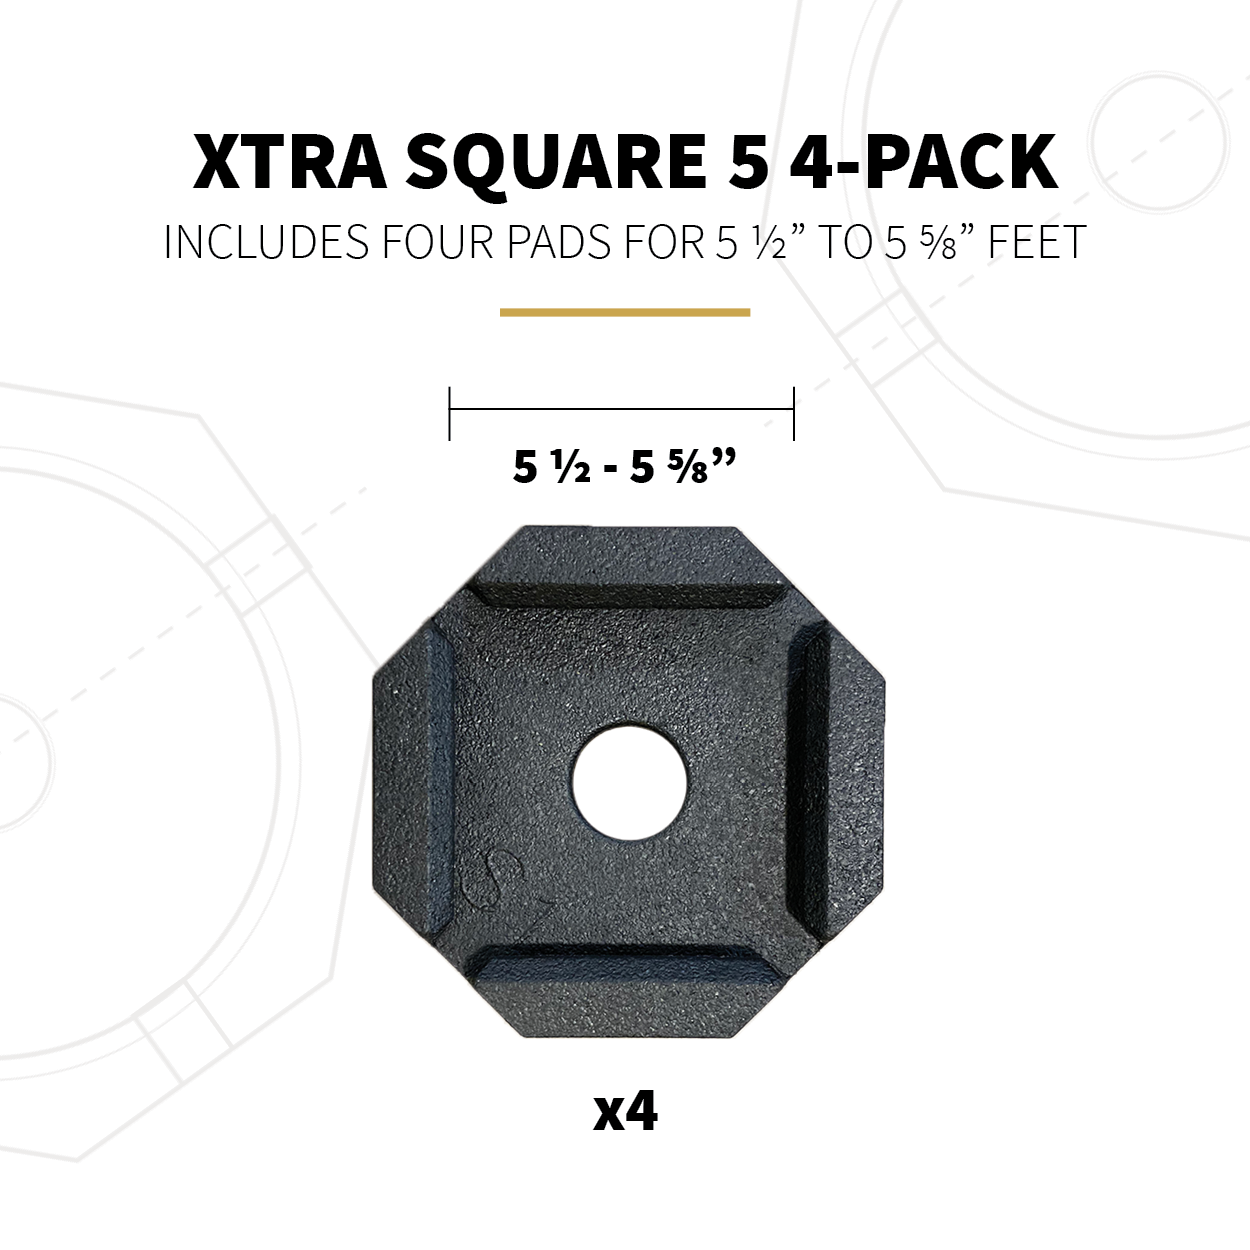 XTRA Square 5 4-Pack Specs